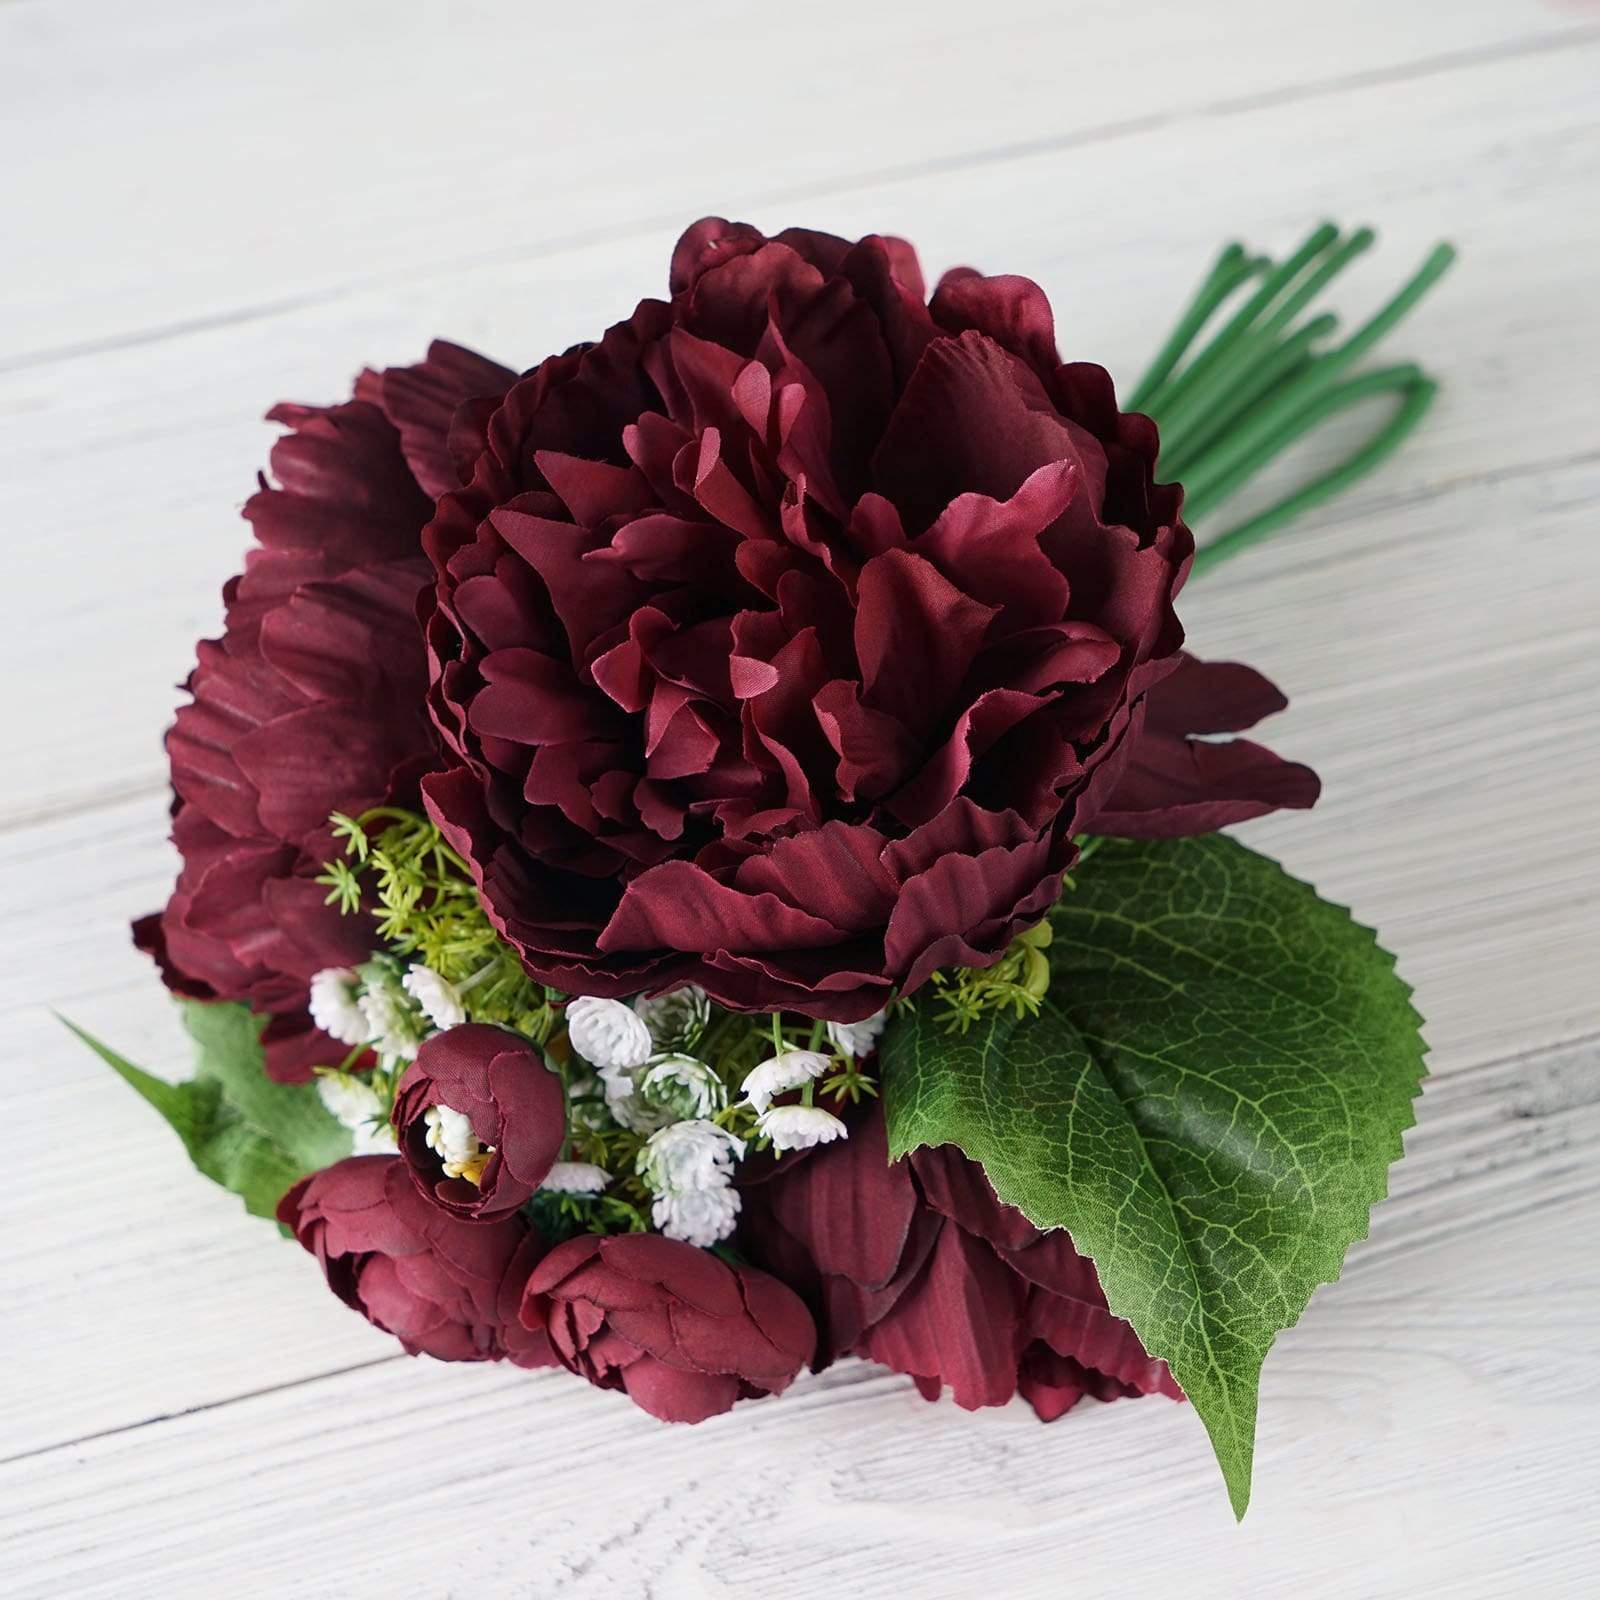 12 inch tall Silk Artificial Peony Flowers Bouquet